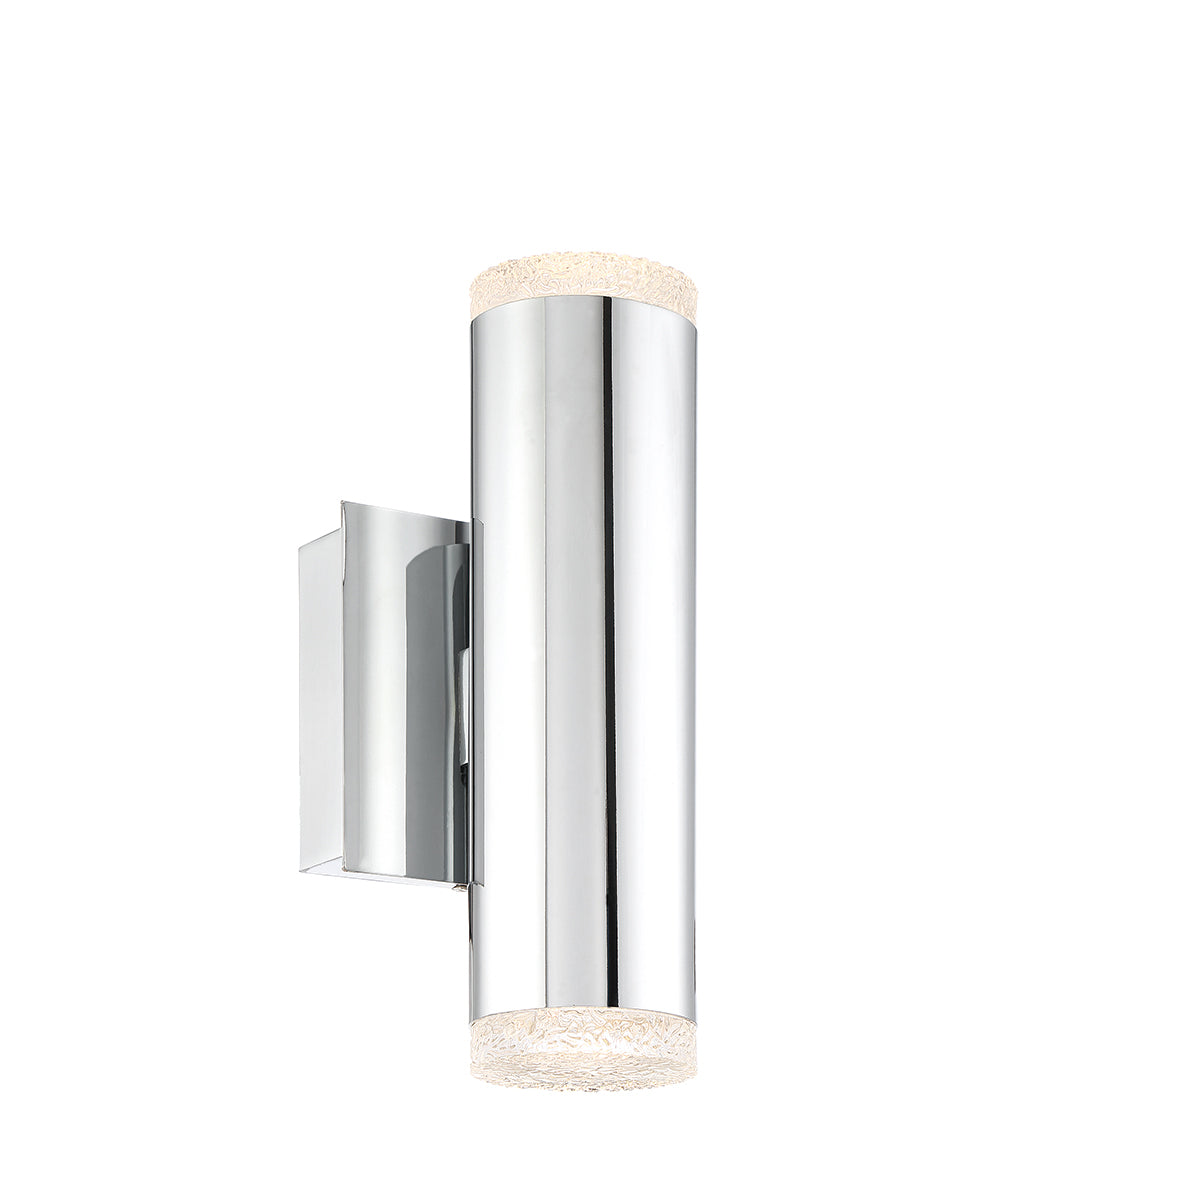 Seaton 2-Light Wall Sconce in Chrome - Lamps Expo